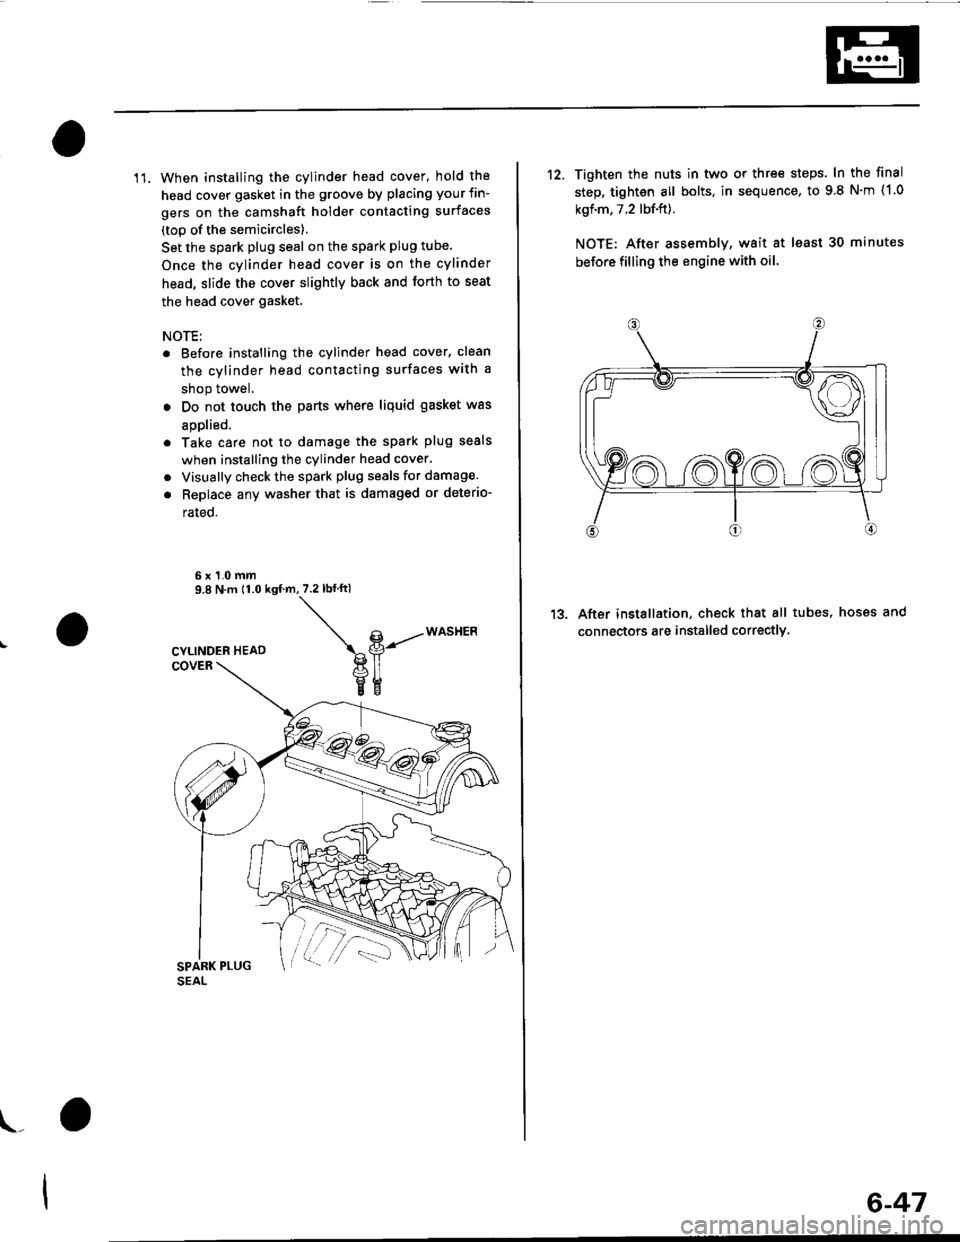 HONDA CIVIC 1996 6.G Workshop Manual 11. When installing the cylinder head cover, hold the
head cover gasket in the groove by placing your fin-
gers on the camshaft holder contacting surfaces
(top of the semicircles)
Set the spark plug s